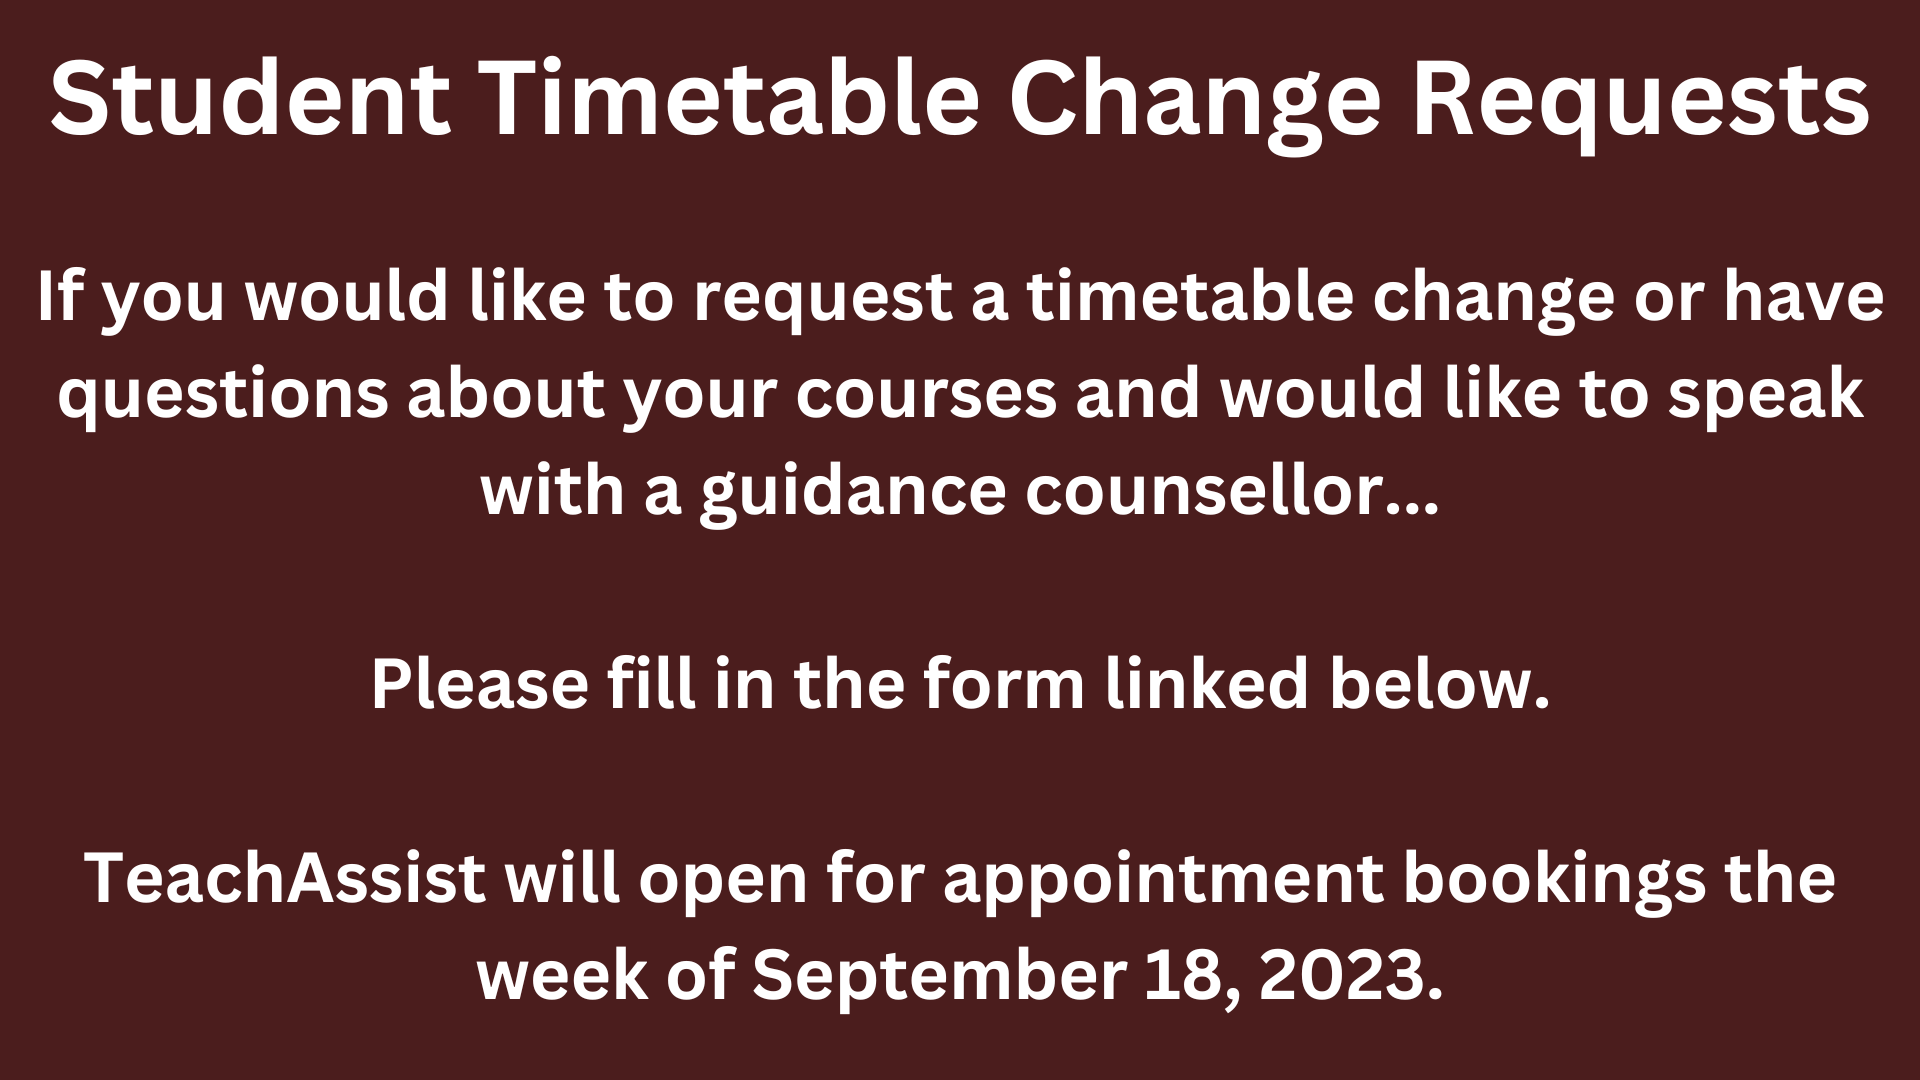 Student Timetable Change Requests (1).png